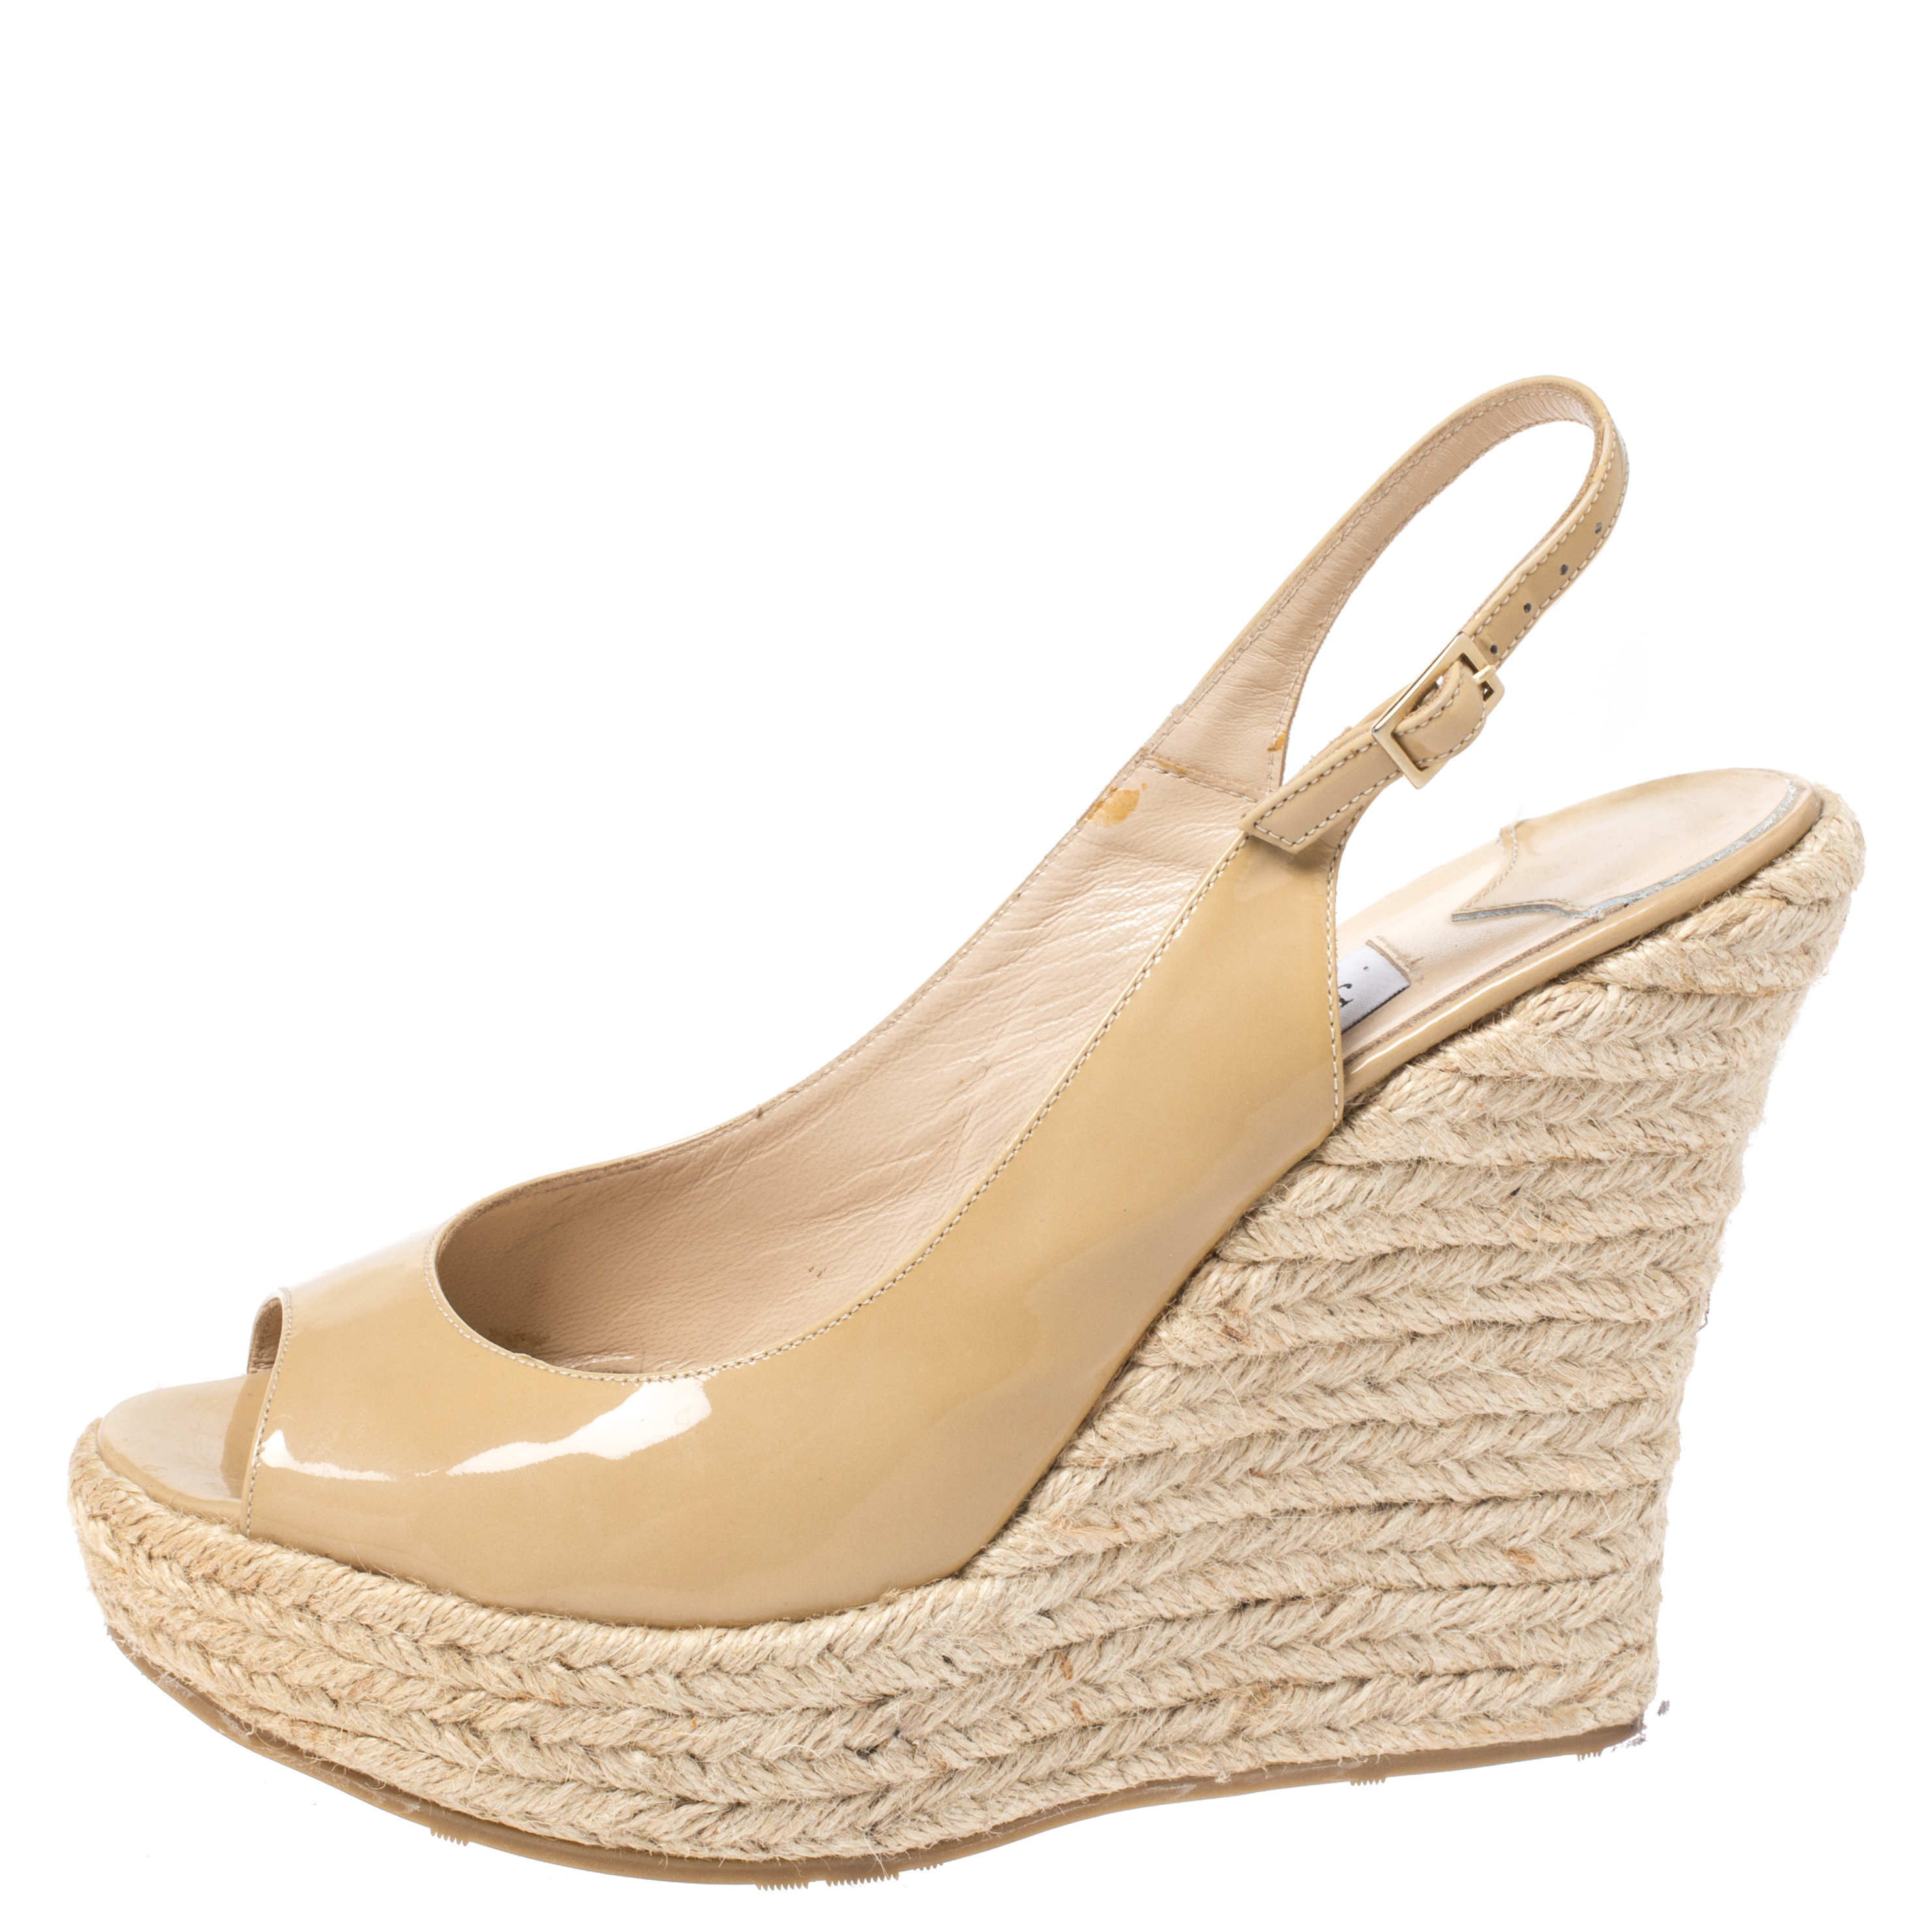 

Jimmy Choo Beige Patent Leather Espadrille Wedge Slingback Sandals Size